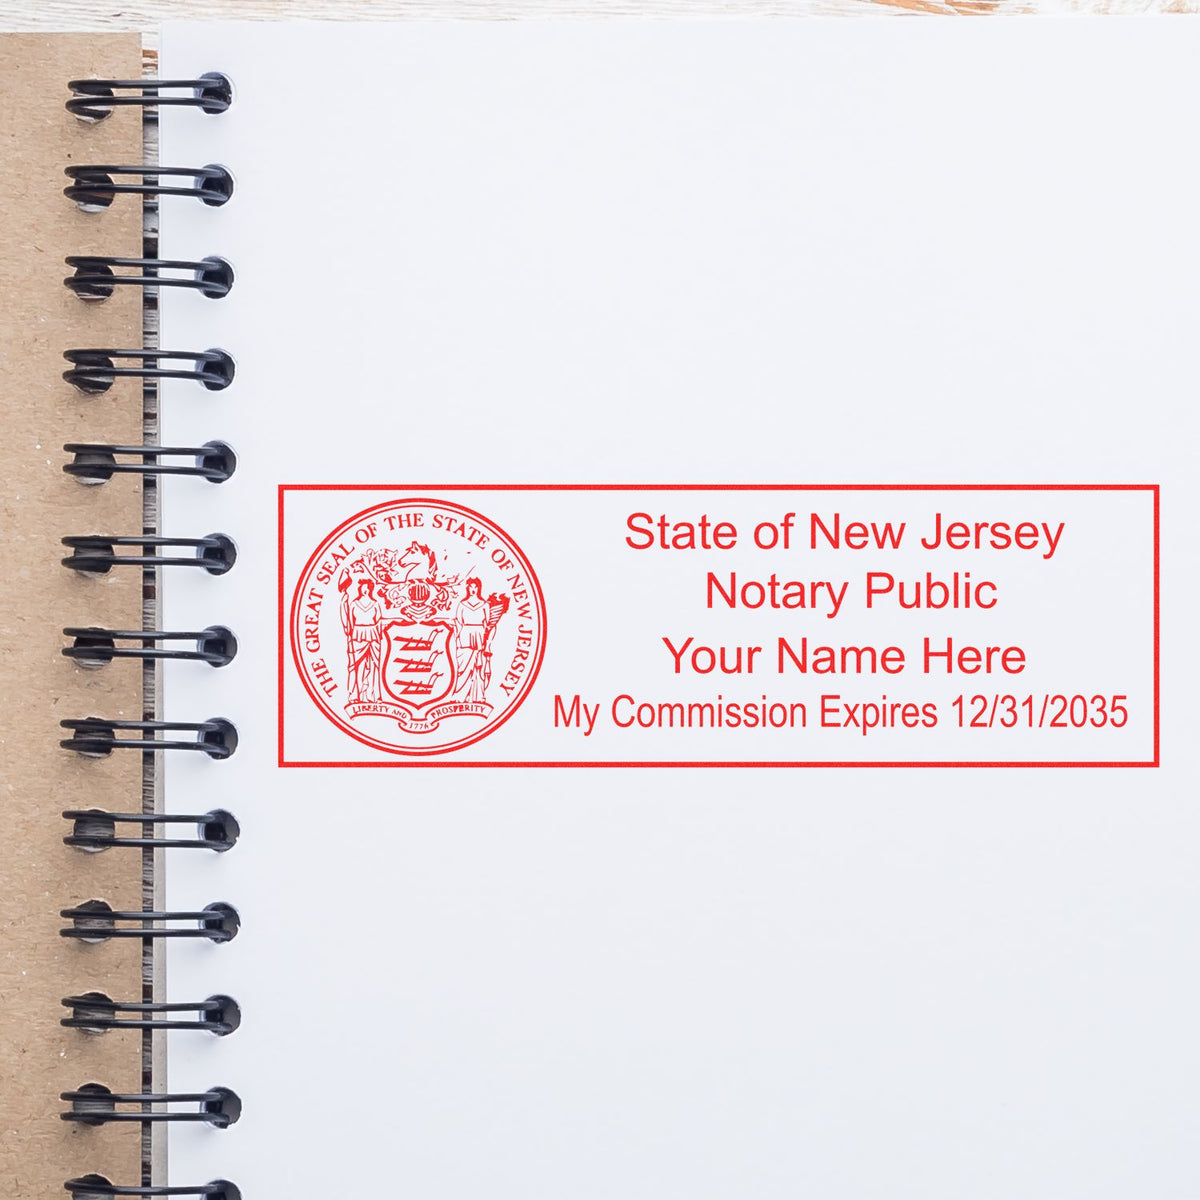 An alternative view of the MaxLight Premium Pre-Inked New Jersey State Seal Notarial Stamp stamped on a sheet of paper showing the image in use